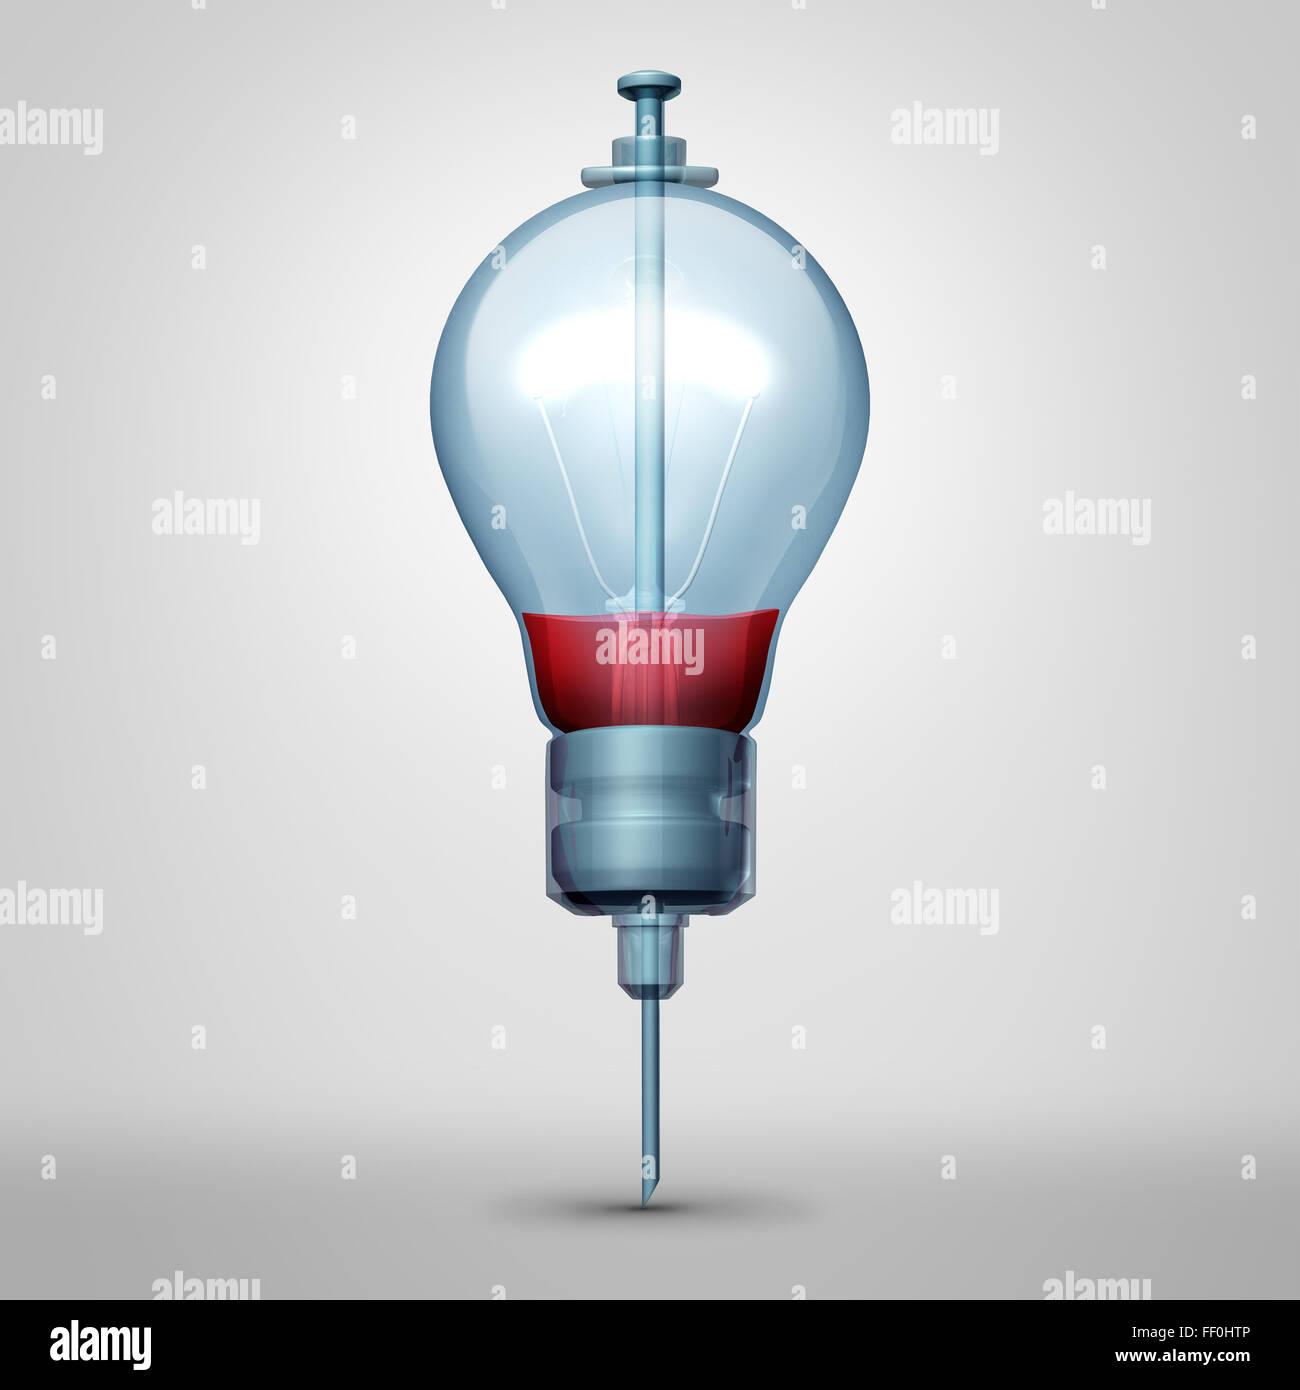 Medical idea concept as a syringe needle with red liquid inside shaped as a lightbulb or light bulb symbol as a creative medicine metaphor for therapy or blood donation or smart hospital care icon. Stock Photo